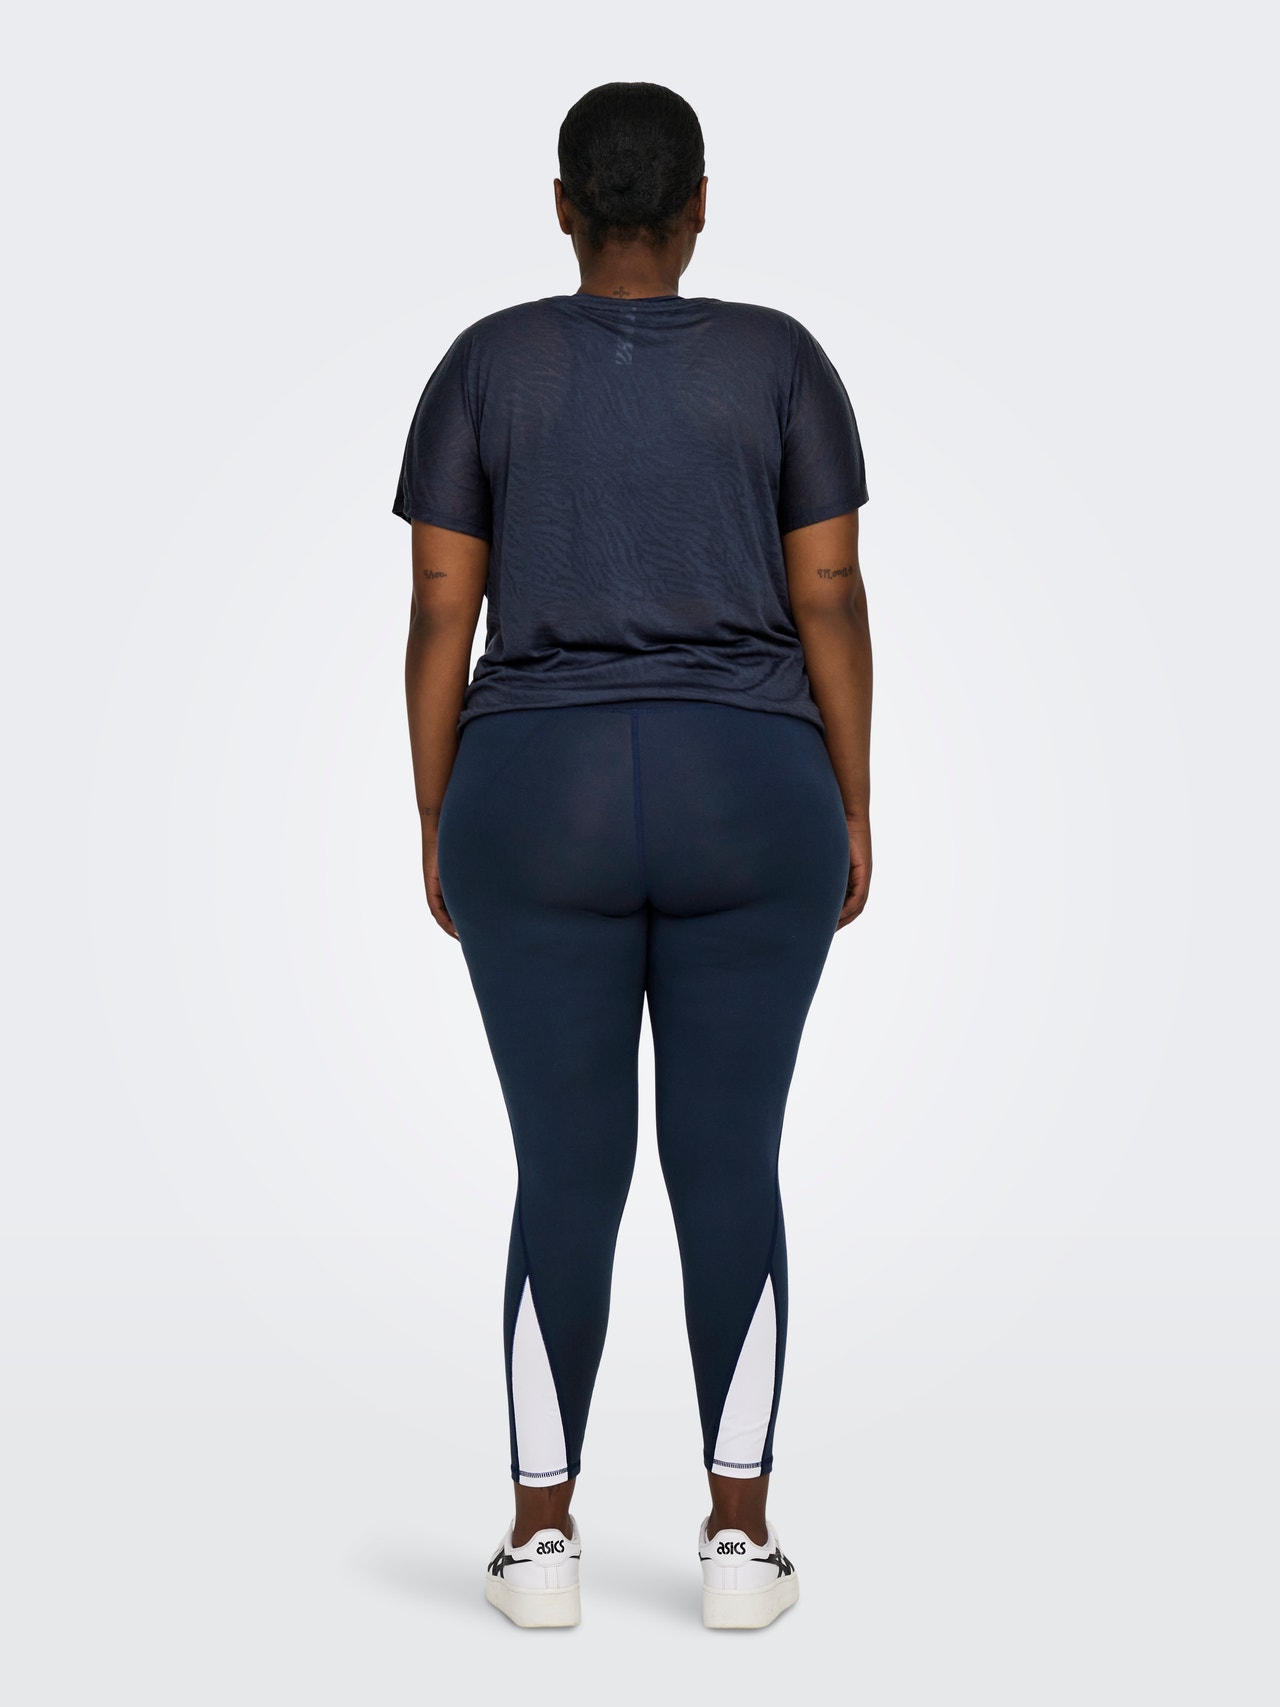 ONLY Curvy Sport tights with high waist -Blue Nights - 15289043